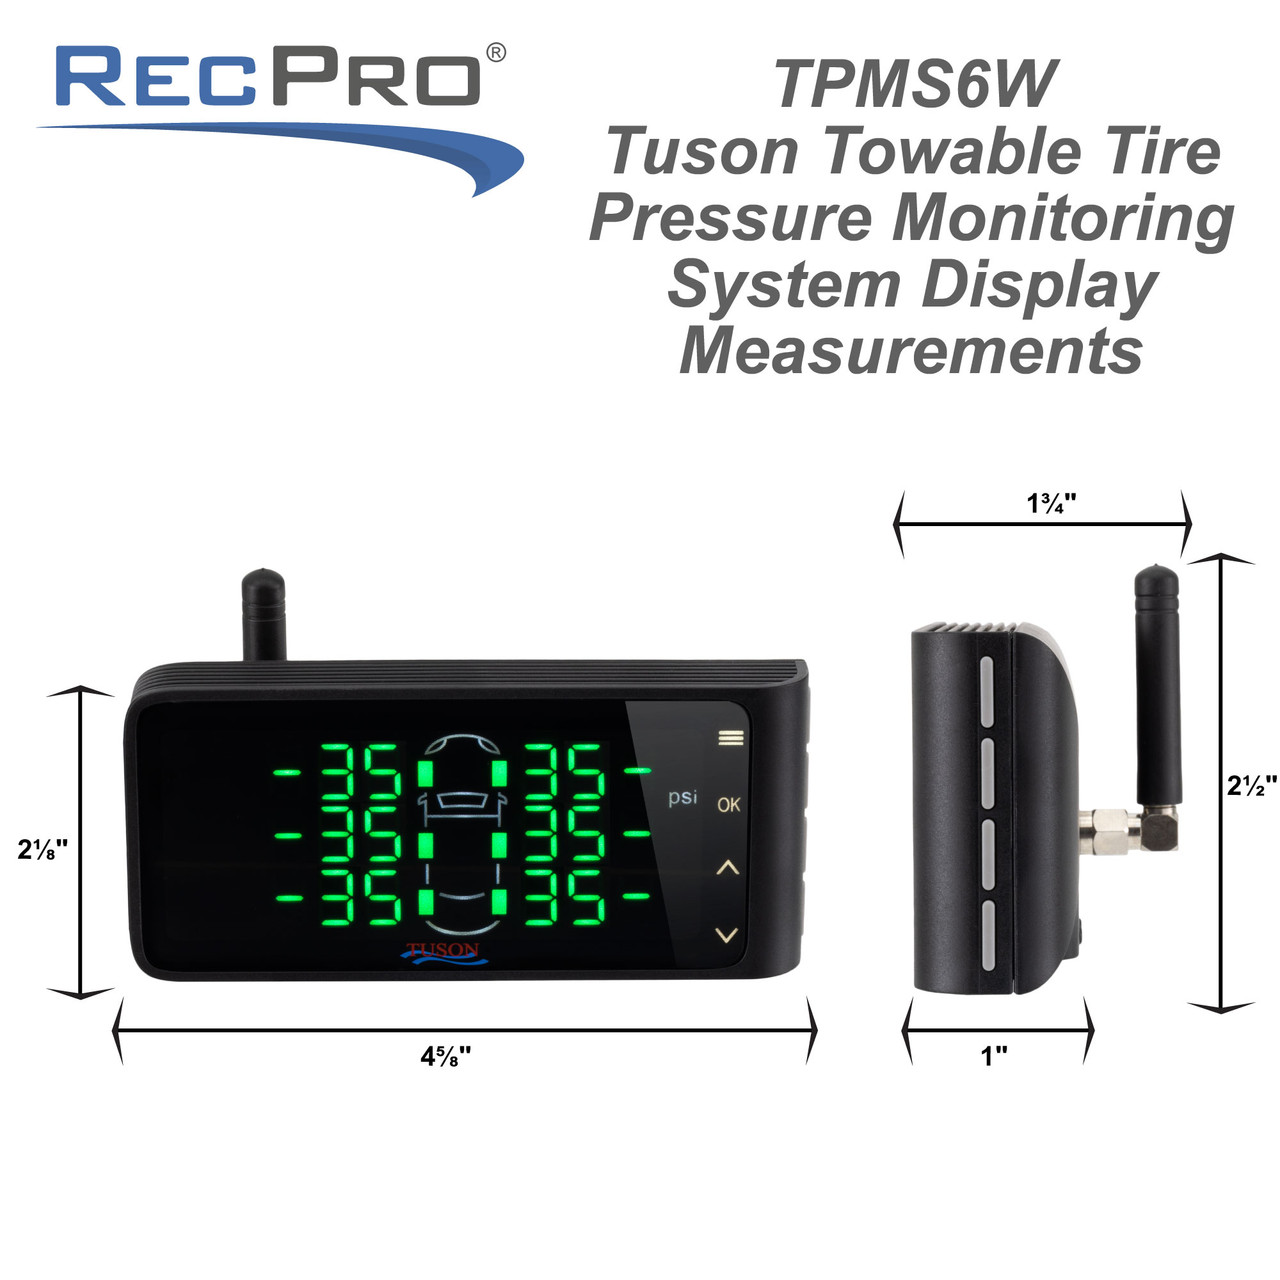 https://cdn11.bigcommerce.com/s-kwuh809851/images/stencil/1280x1280/products/497/28906/TPMS6W-Tuson-Towable-Tire-Pressure-Monitoring-System-Measurements__00568.1657550336.jpg?c=2&imbypass=on